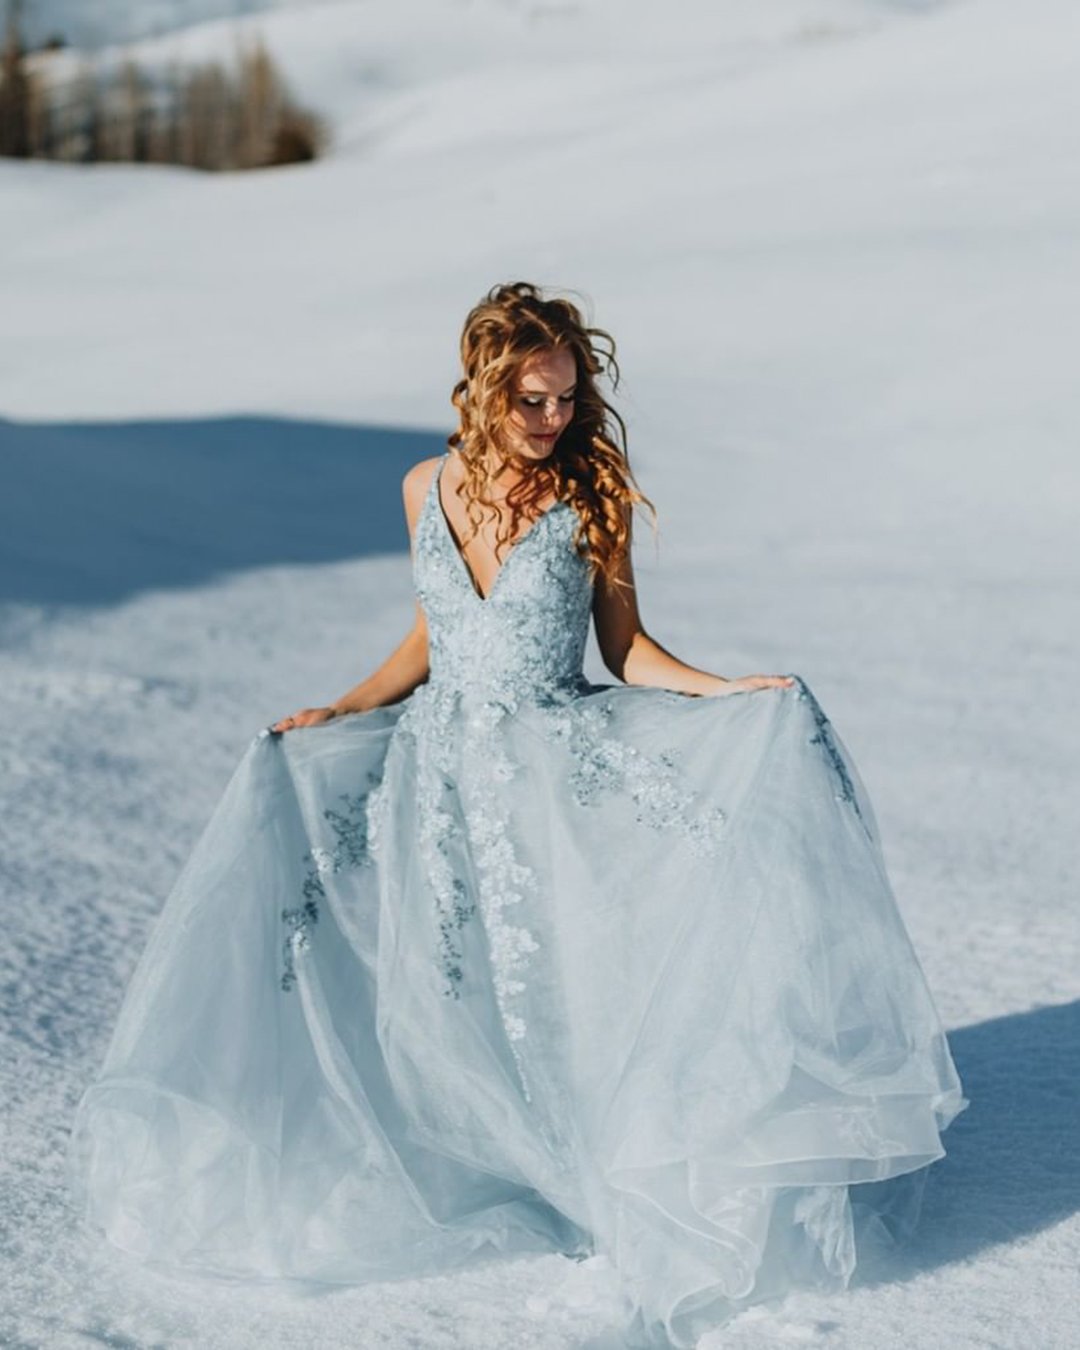 Winter Wedding Dresses & Outfits. 24 Chic Ideas You Should See